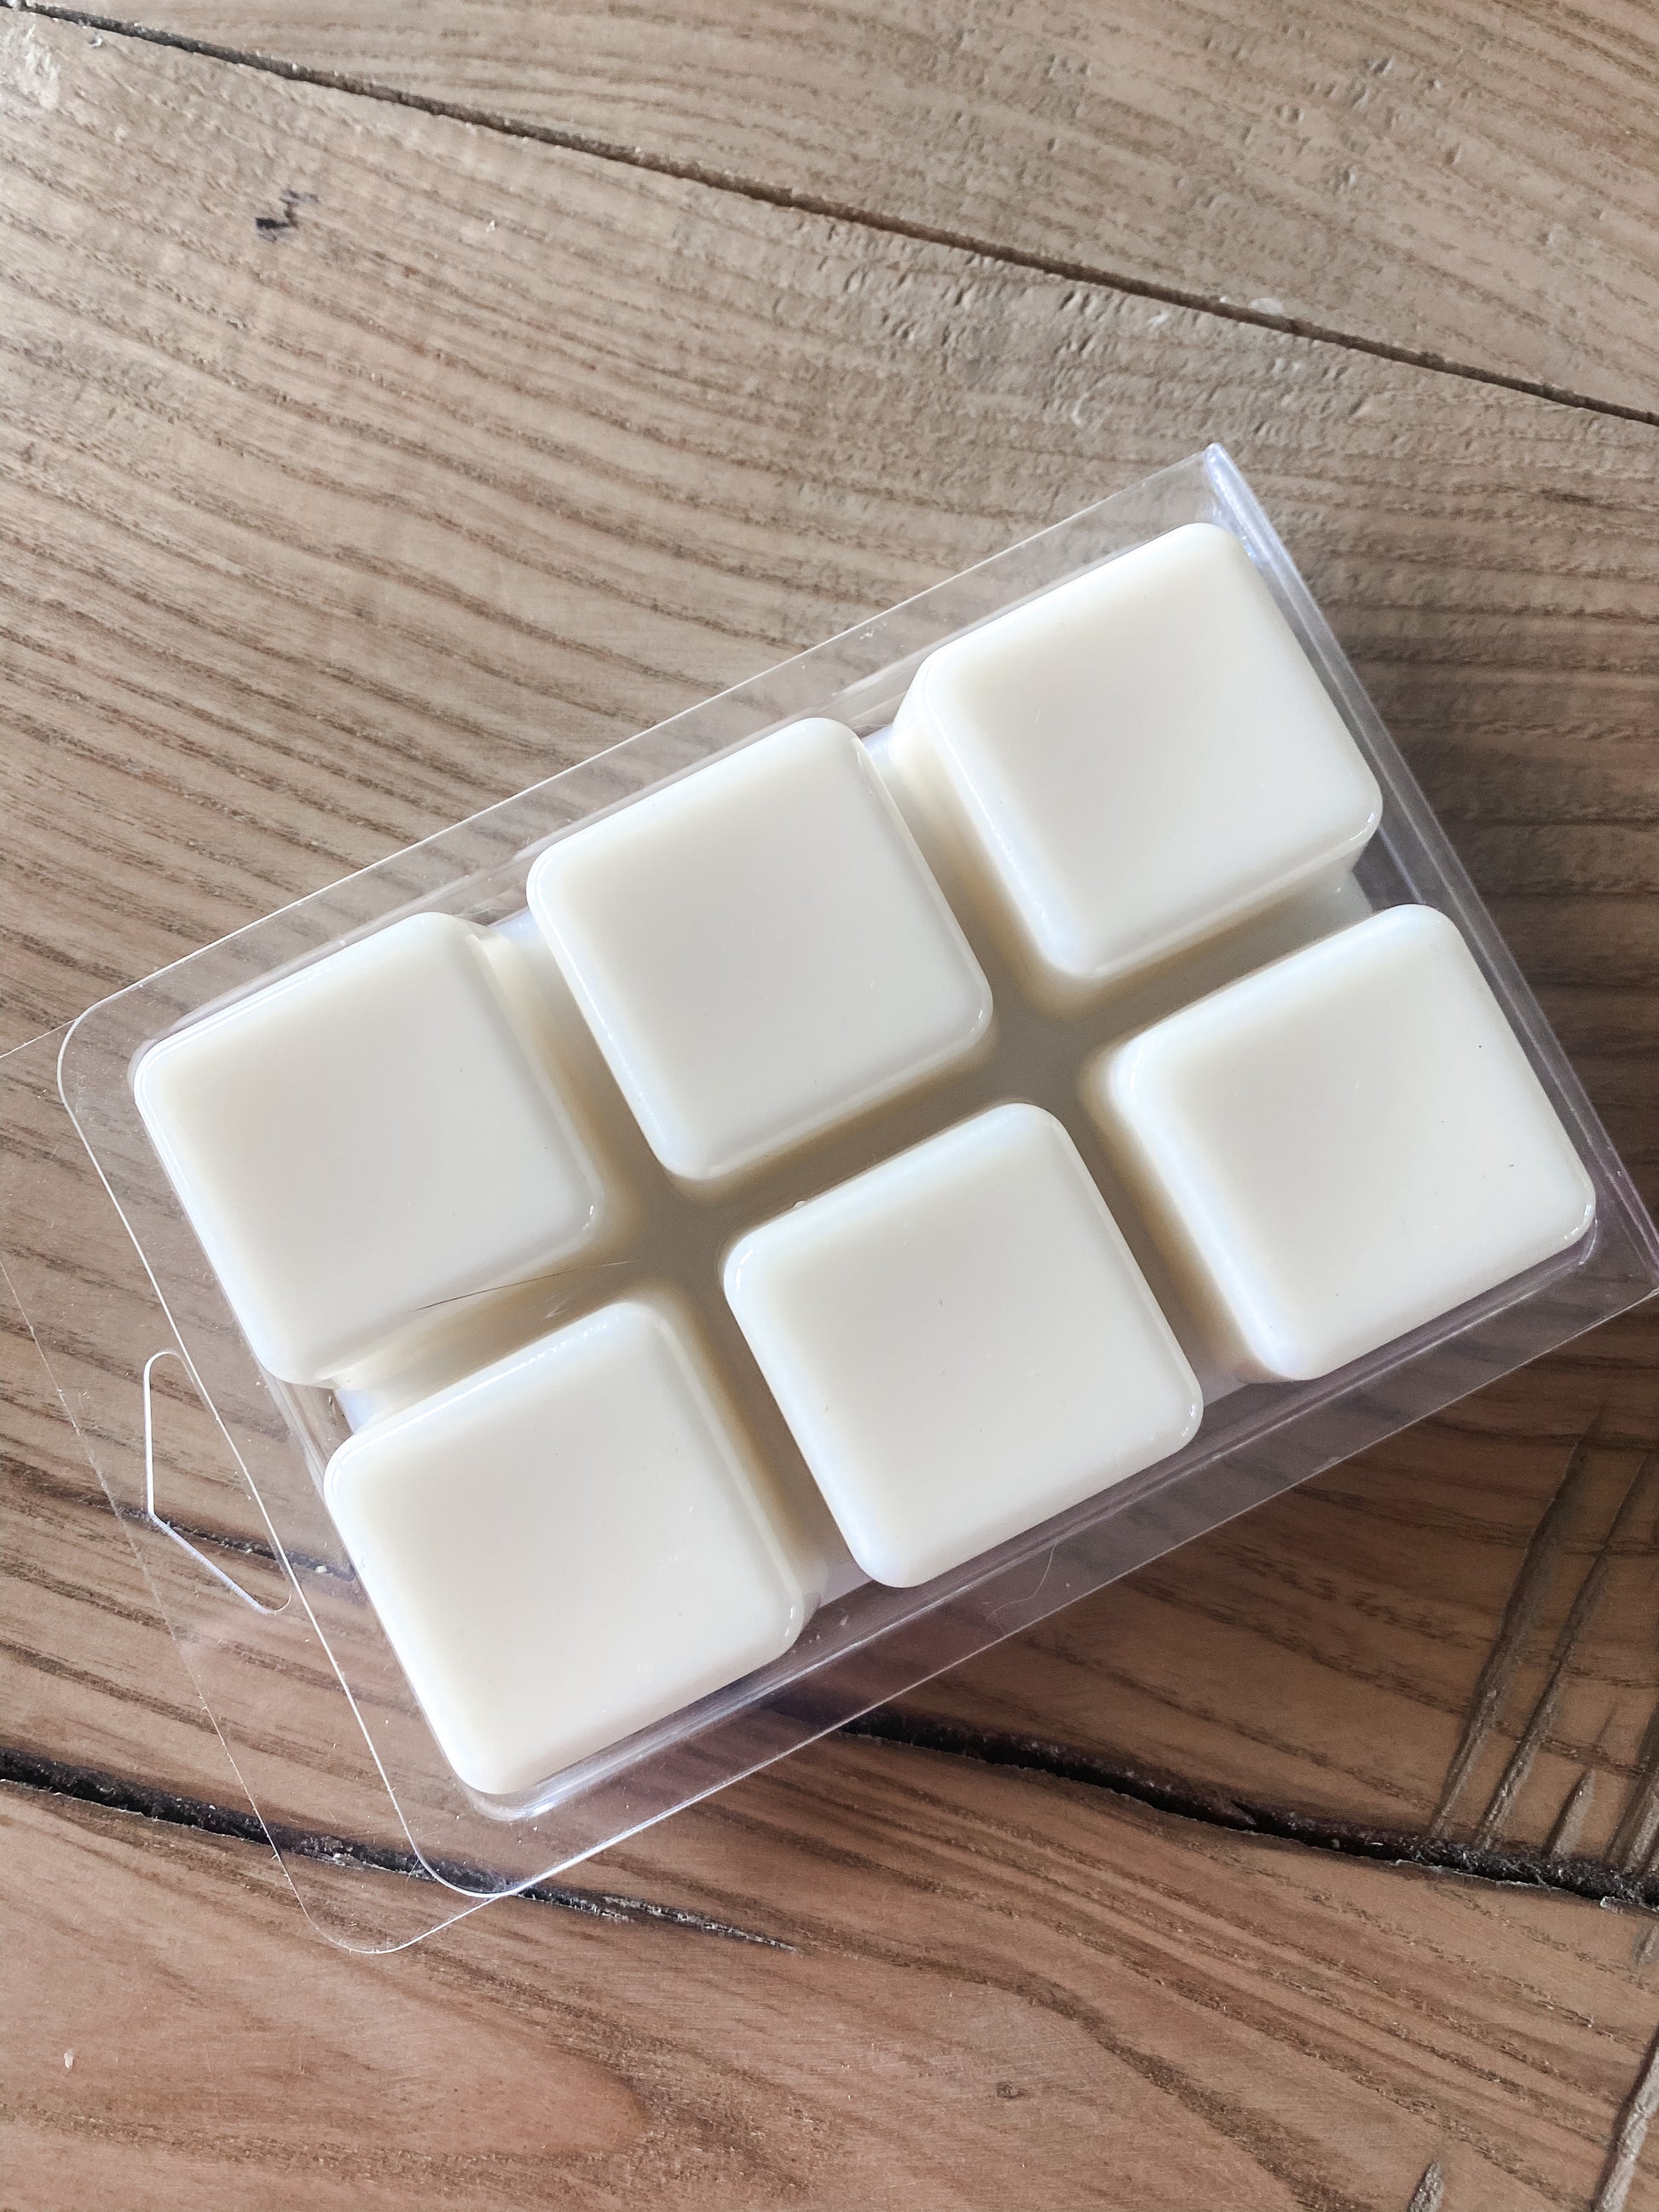 Large! 5.5 oz PET 6 Cavity Clamshell molds for wax melts or soaps – CJ  Candle Supply